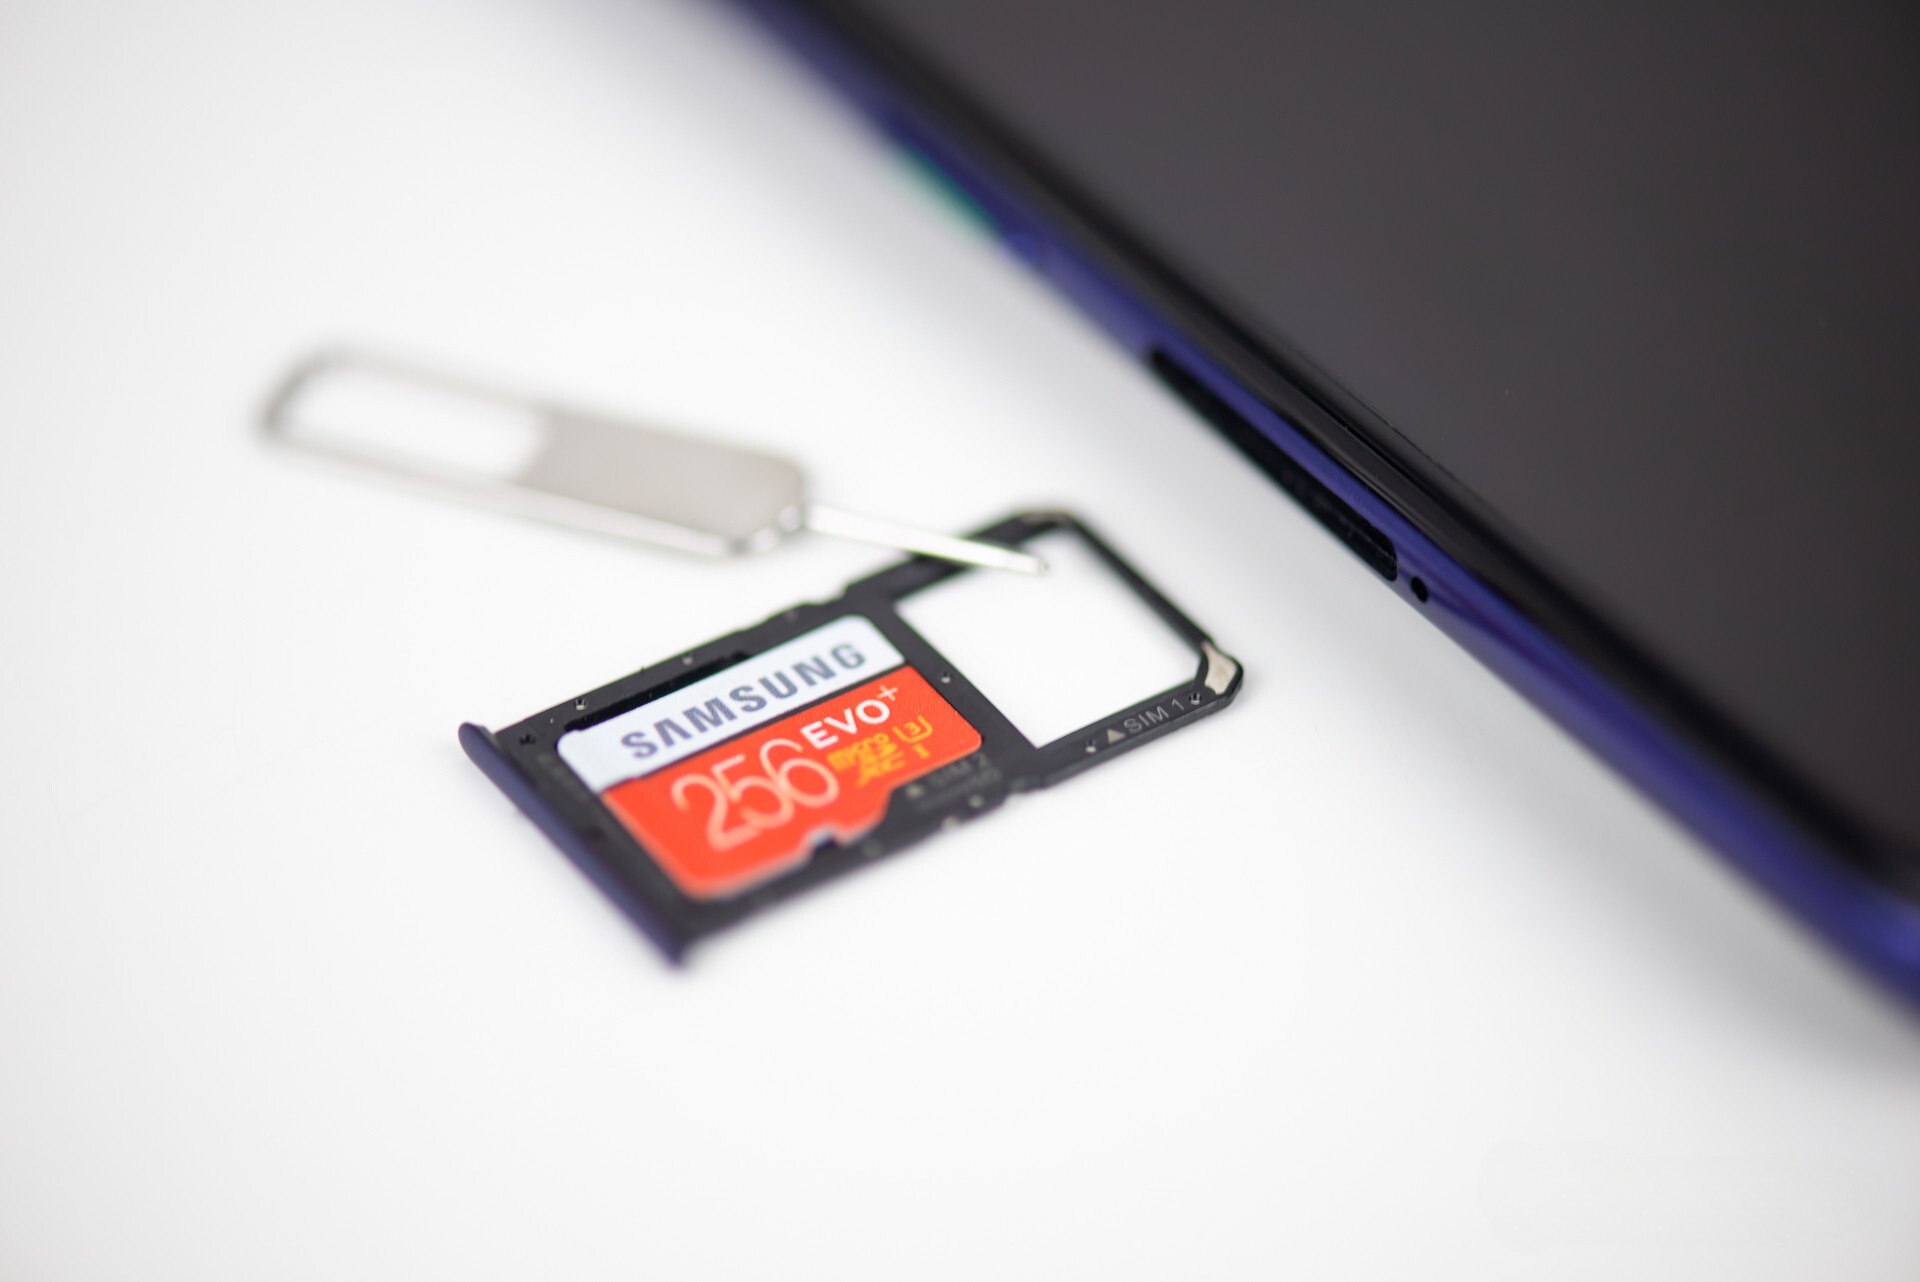 How To Move Apps On Tablet To Sd Card